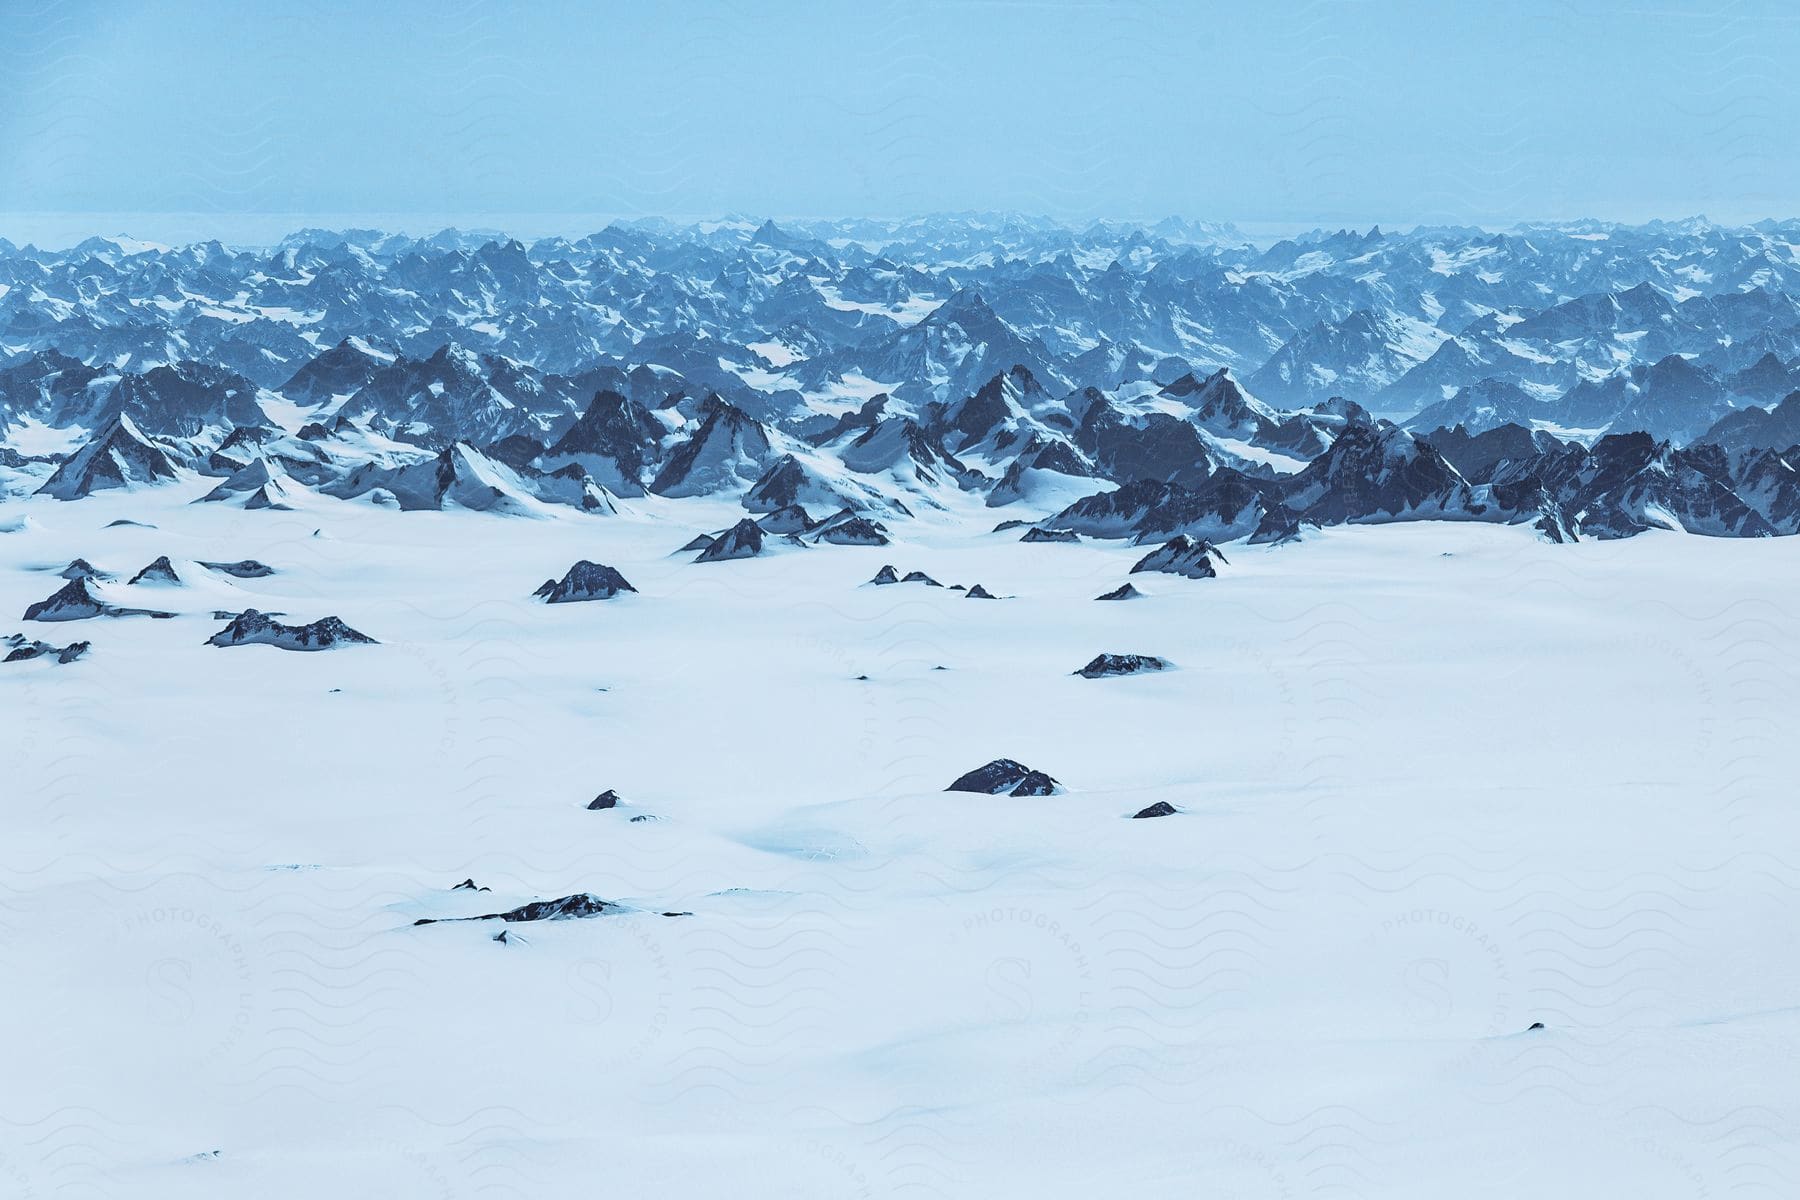 Snowy mountains stretching away in an aerial perspective